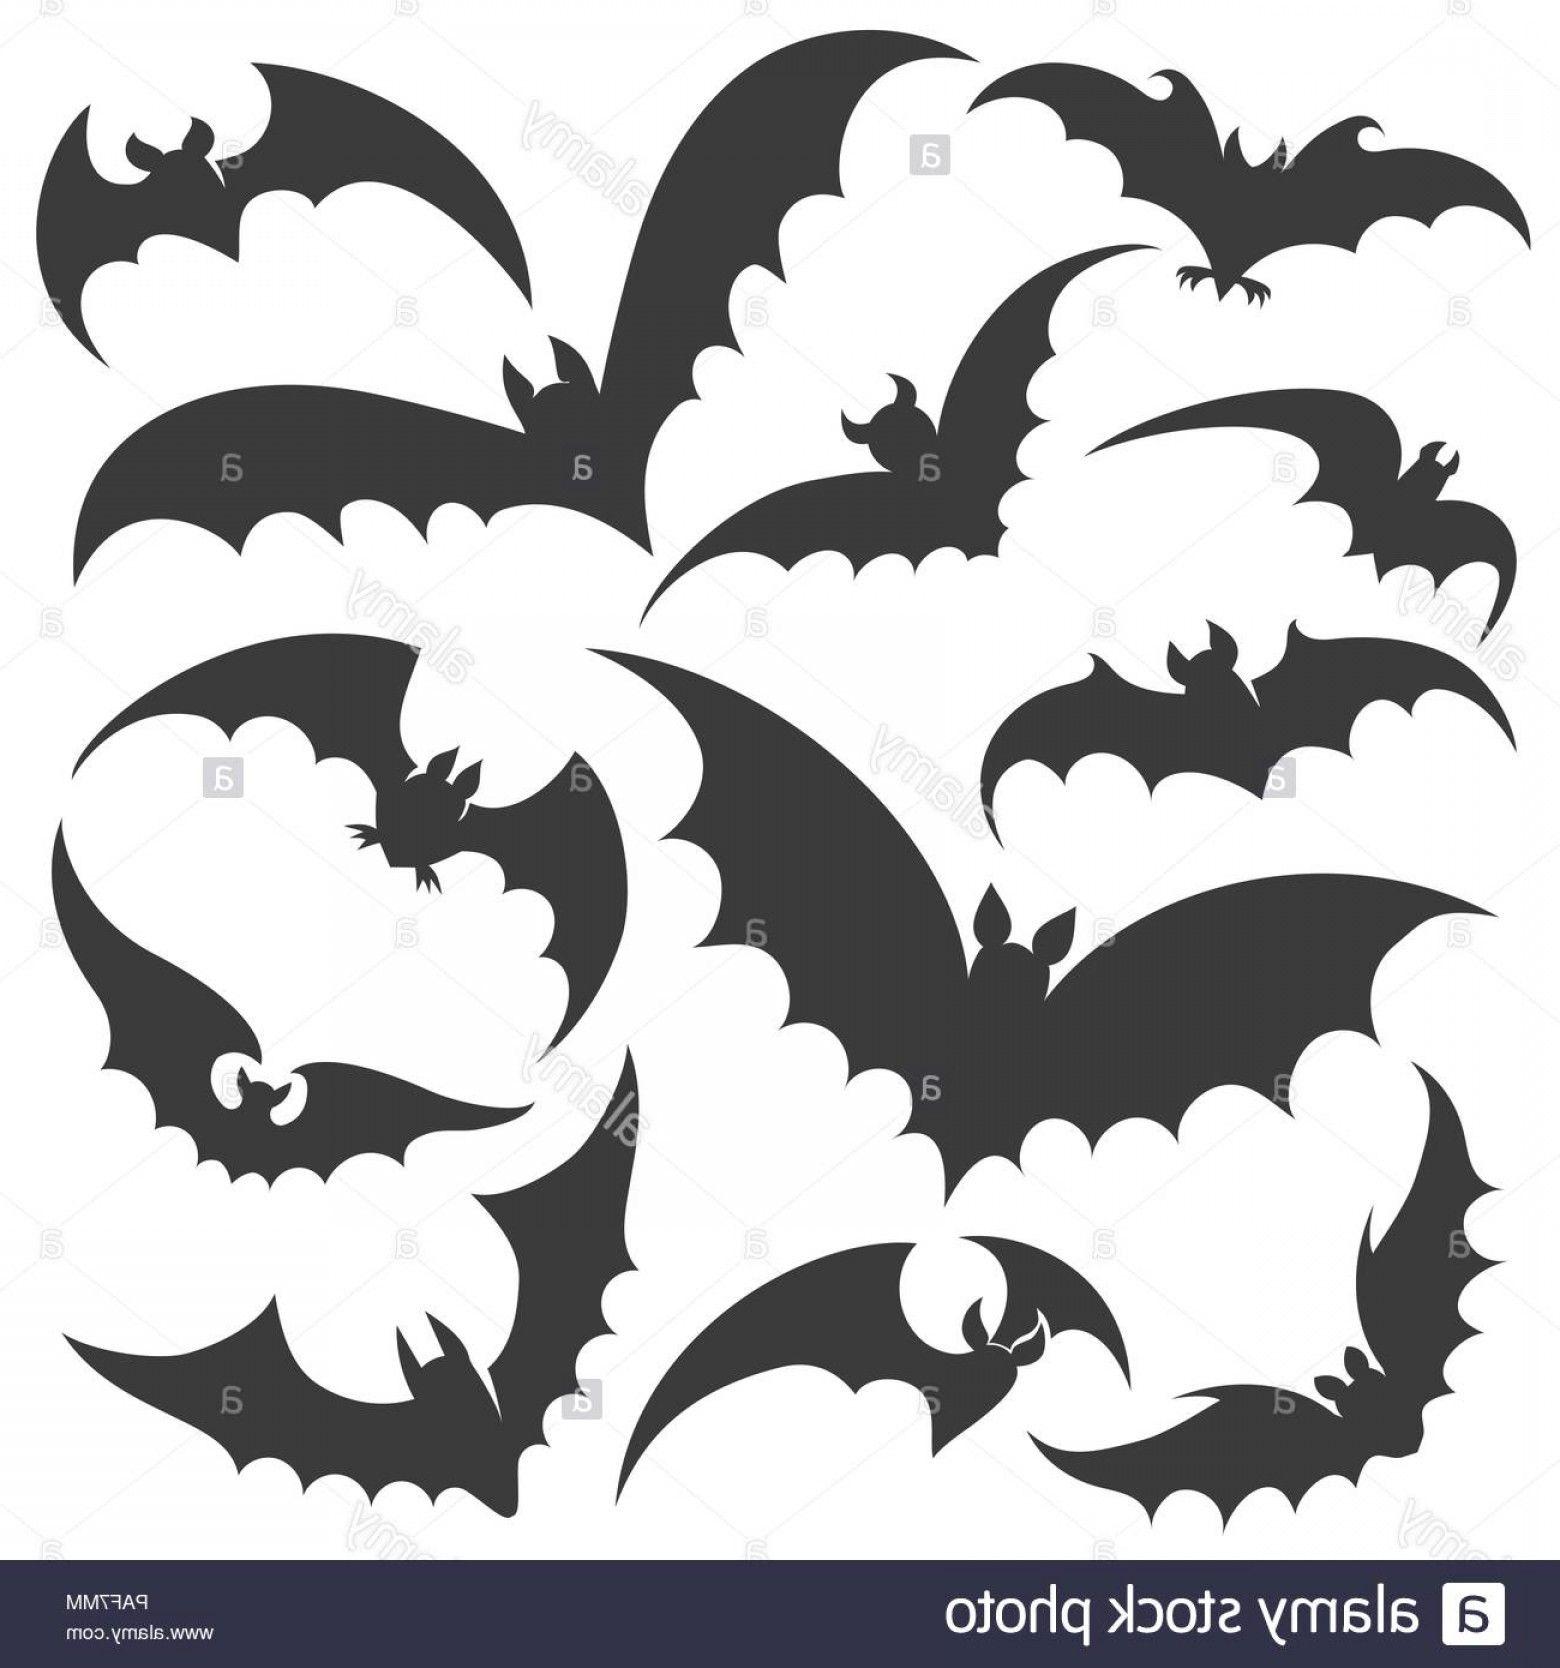 Bat Silhouette Images for Logo - Bat Silhouettes Vector Bats Silhouette Set Halloween Scary Night